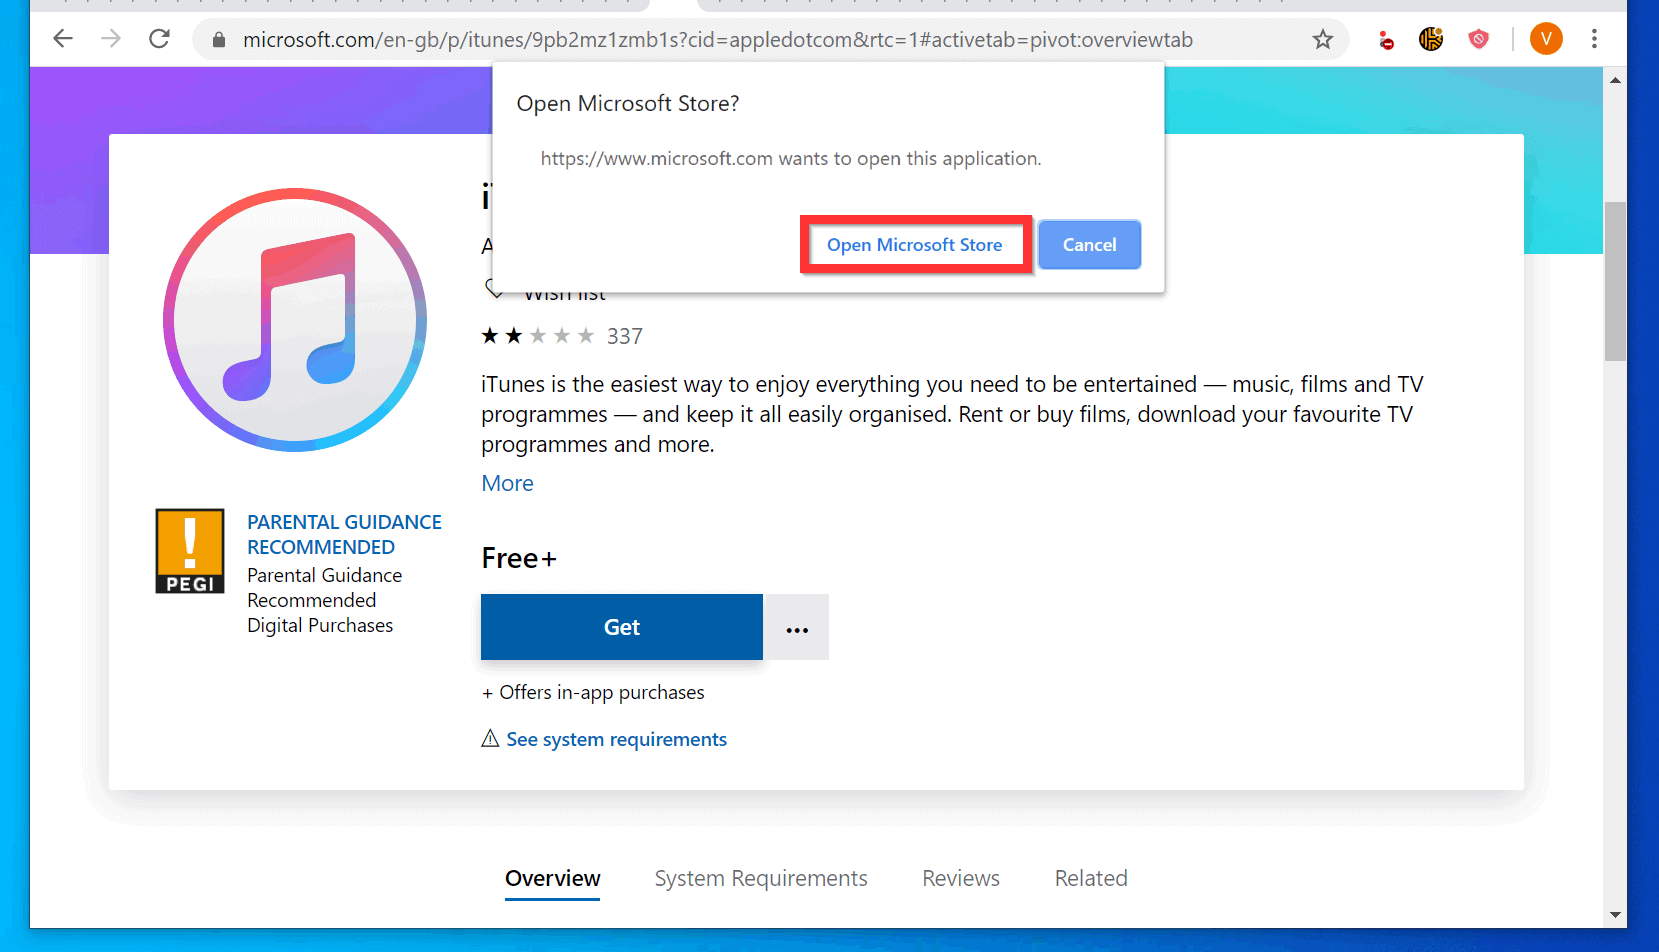 itunes for windows 10 not working